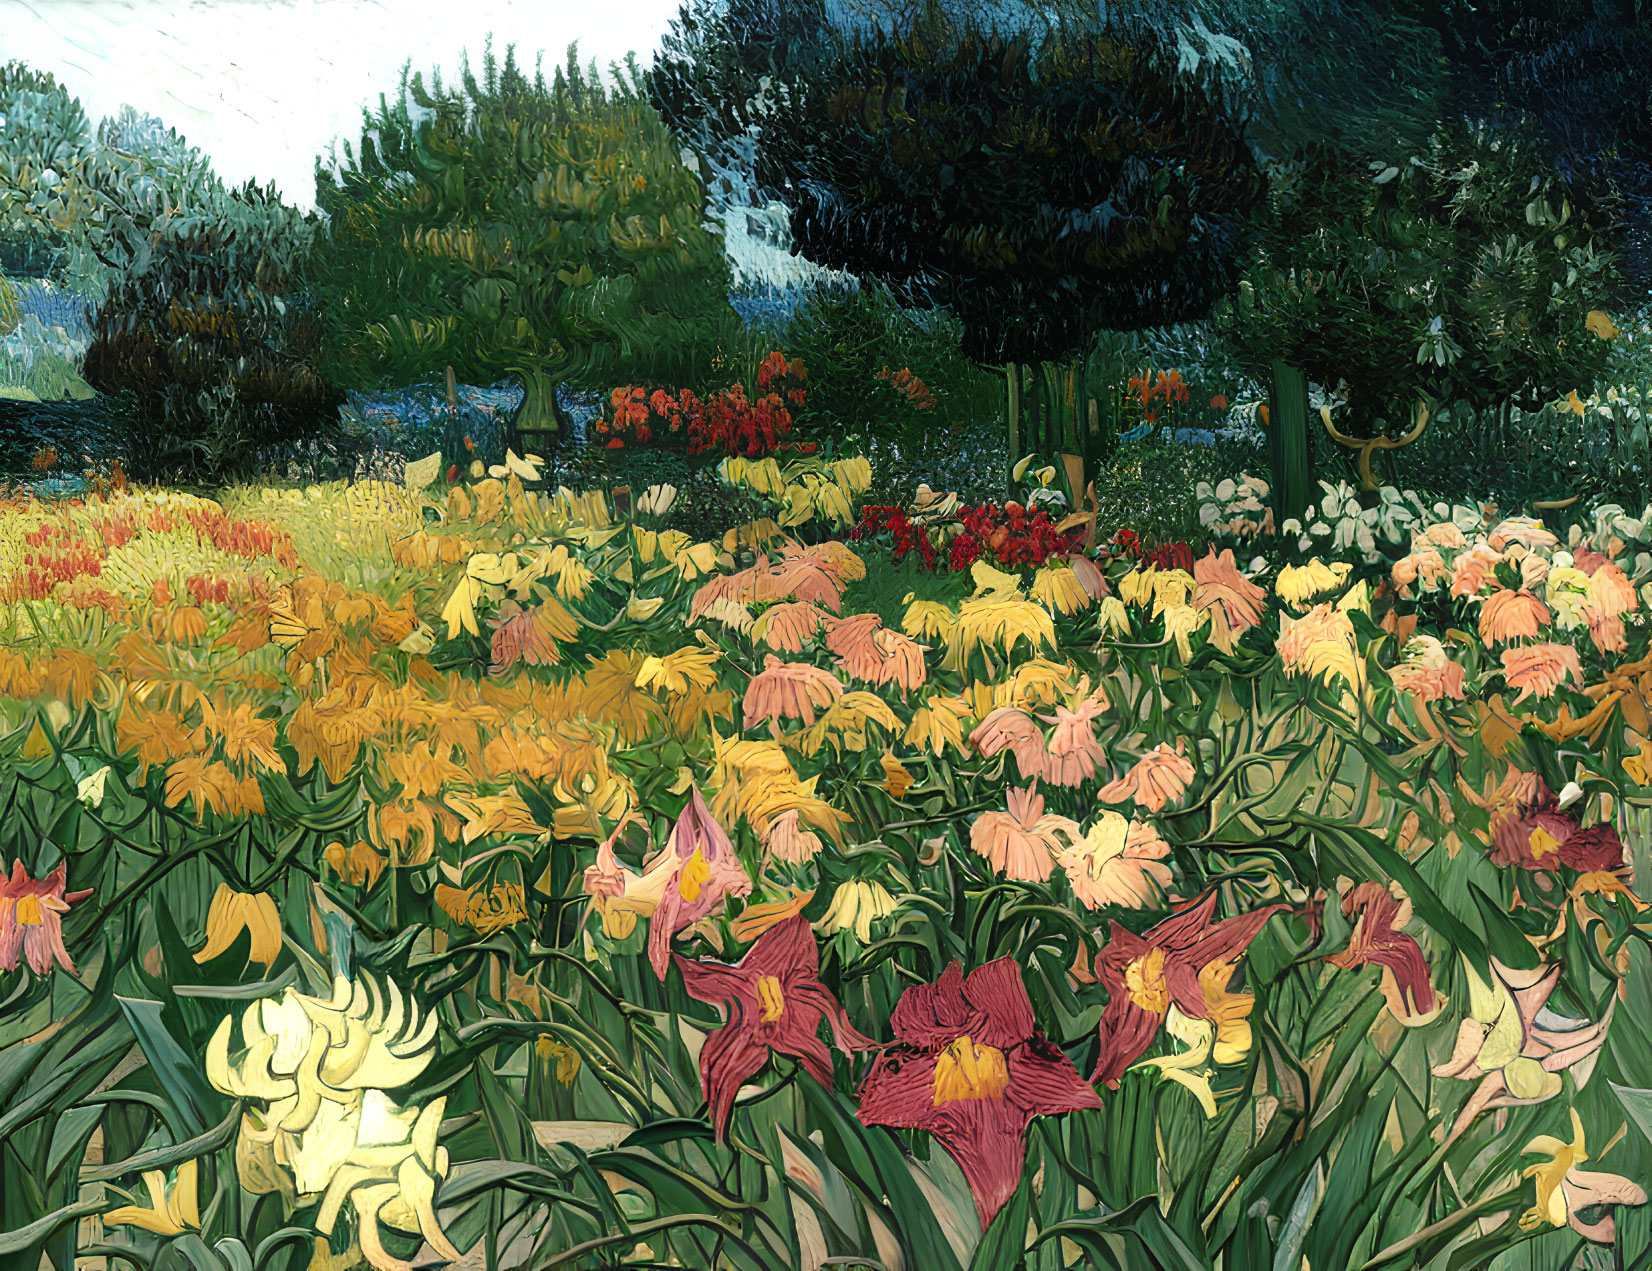 Colorful garden painting with yellow, red, and pink flowers in lush setting